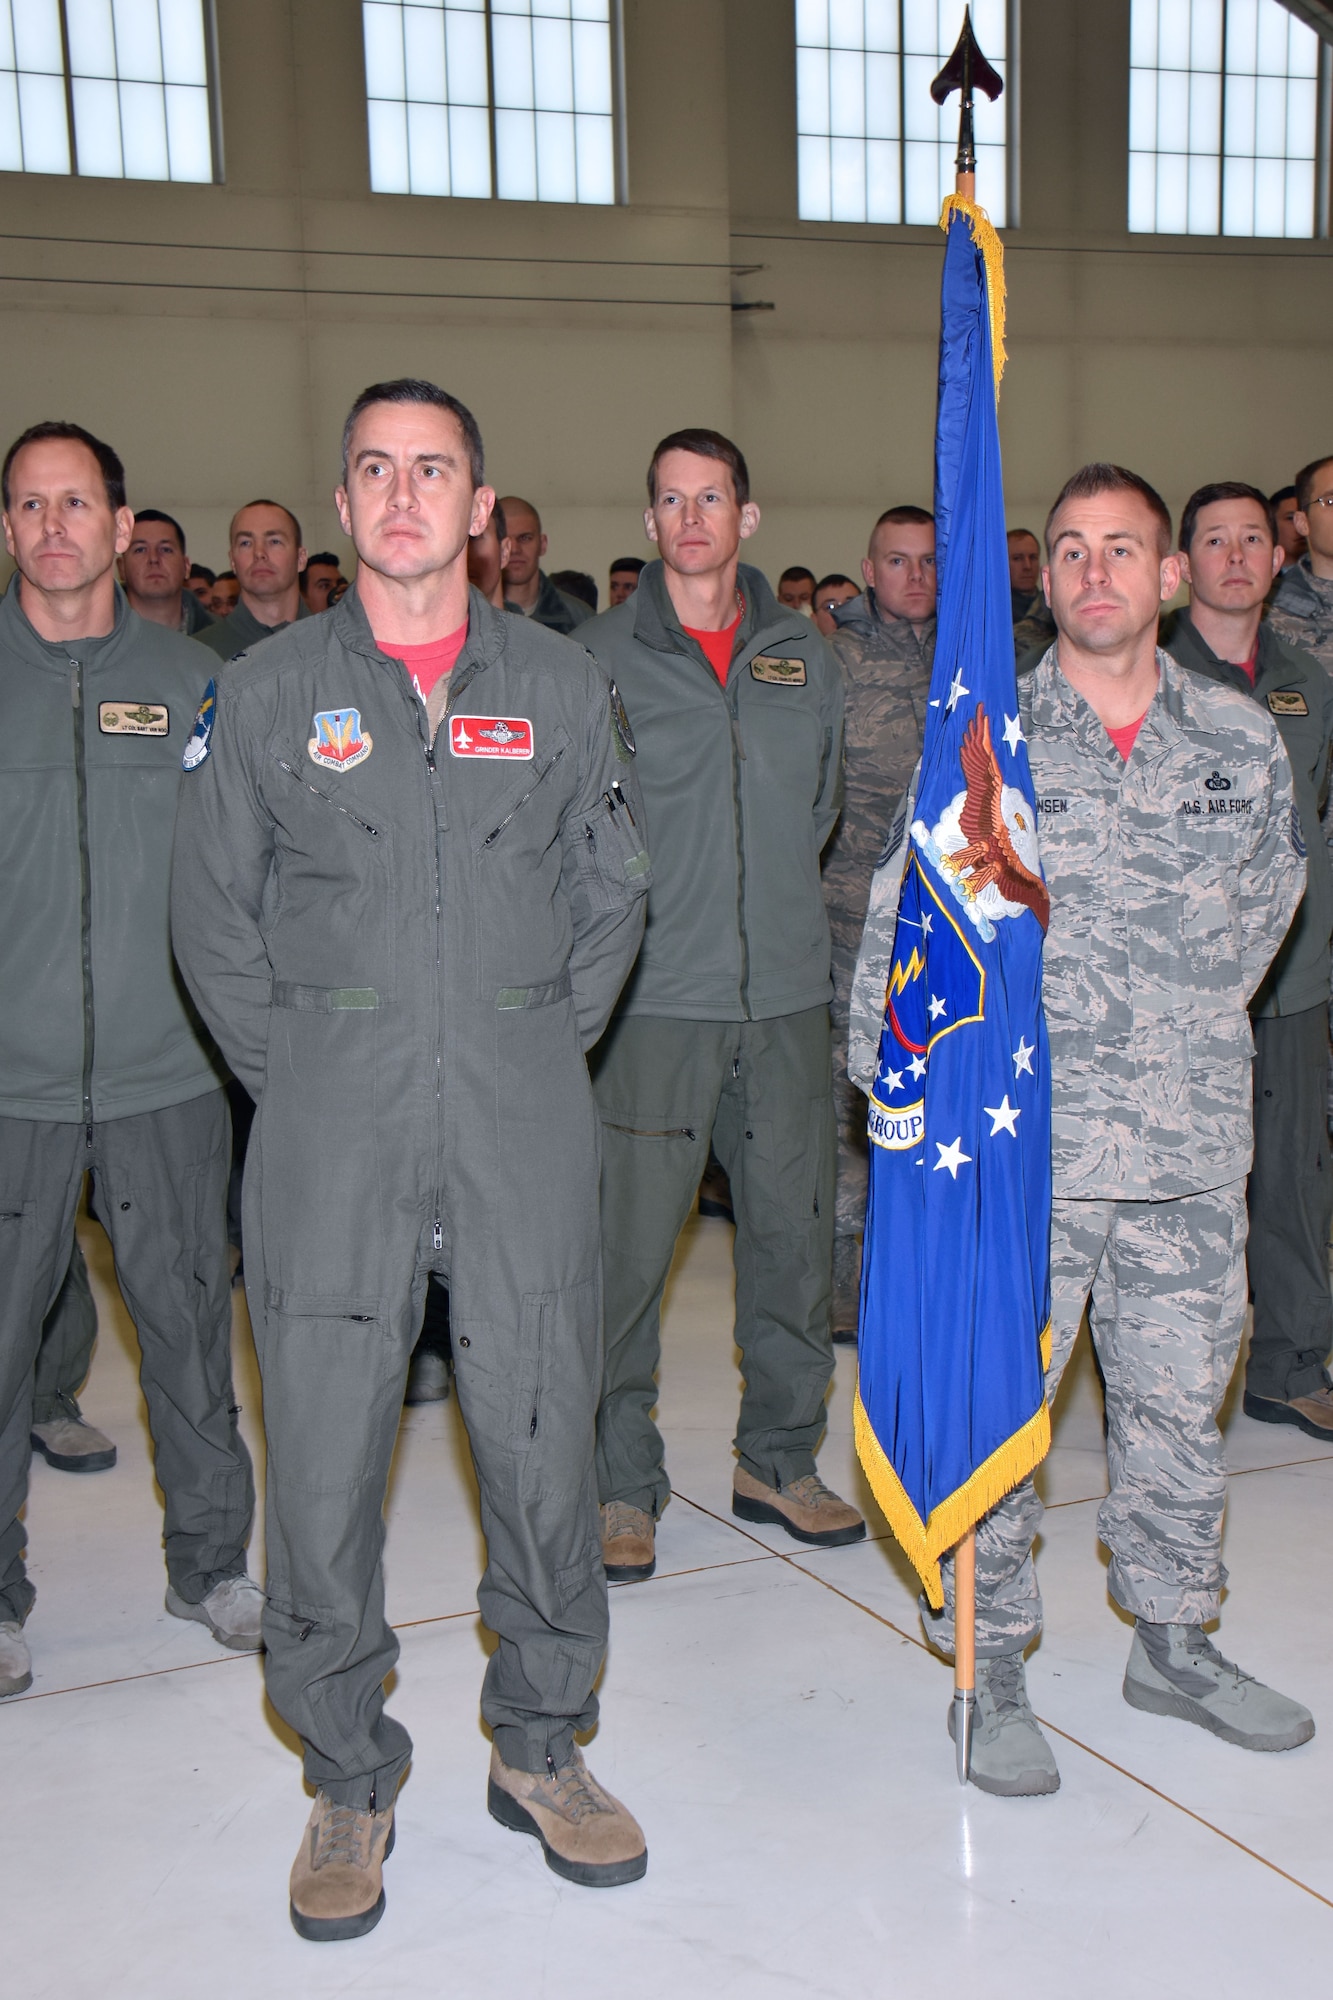 Wisconsin National Guard Airmen assigned to the 115th Fighter Wing attend the unit's annual awards ceremony at Truax Field in Madison, Wisconsin, Jan. 6, 2017. The ceremony highlighted Airman from throughout the unit who displayed exemplary skill and leadership in the performance of their duties both at home, and in deployed locations around the world. (U.S. Air National Guard photo by Master Sgt. Paul Gorman)